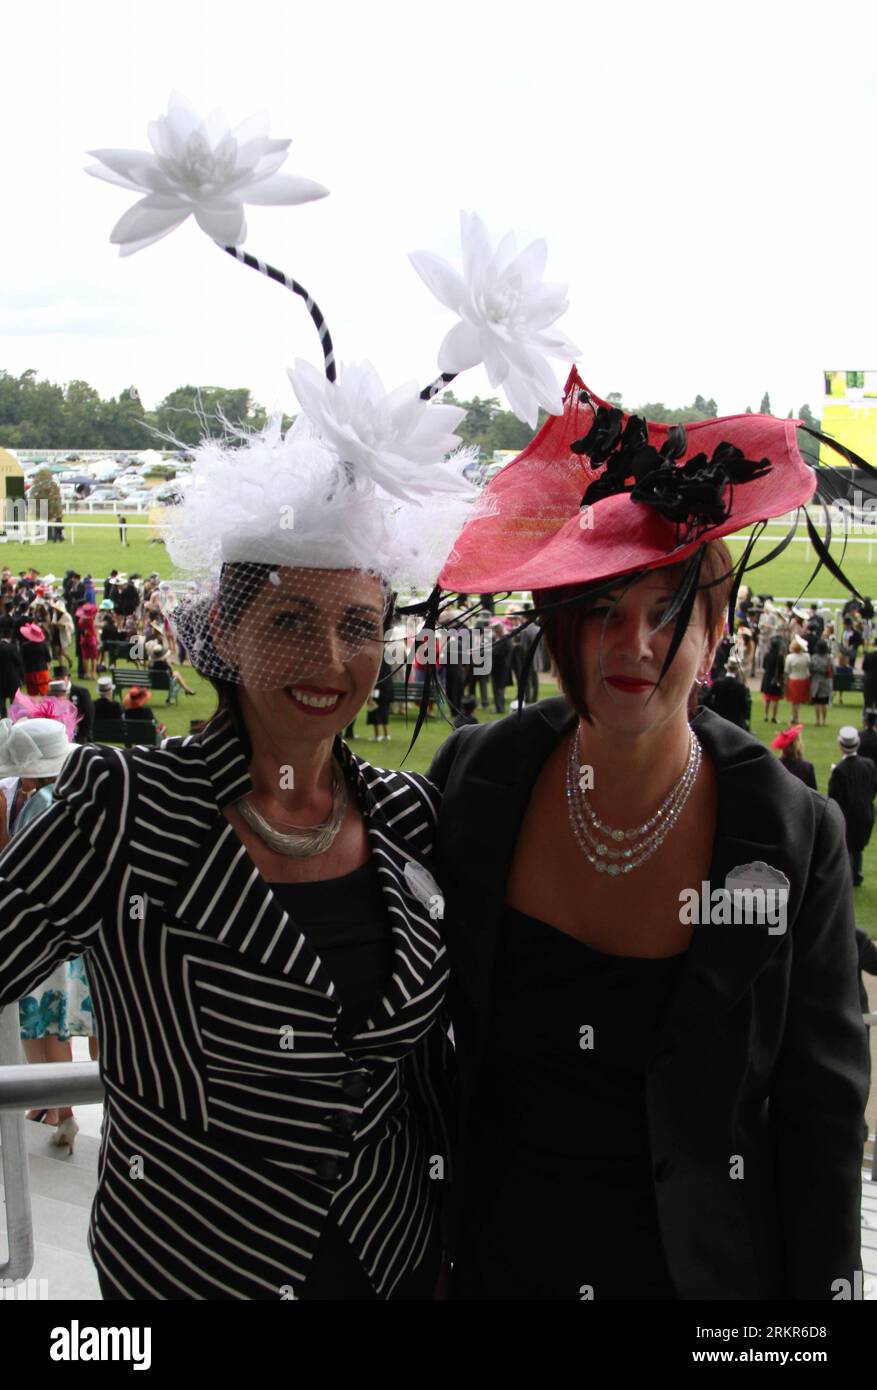 Bildnummer: 58133969  Datum: 21.06.2012  Copyright: imago/Xinhua (120622) -- London, June 21, 2012 (Xinhua) -- Women wearing hats pose for photo on the Royal Ascot, in Ascot, Berkshire, UK, June 21, 2012. Dated from 1711, the annual Royal Ascot week is one of Europe s most famous horse racing event. The Thursday in every Royal Ascot week is the traditional Ladies Day, on which spectating ladies specially wear beautiful hats for the Gold Cup race. (Xinhua/Zhang Yuenan) (zy) UK-ROYAL ASCOT-LADIES DAY PUBLICATIONxNOTxINxCHN Entertainment Galopp Royal Ascot Mode xjh x0x premiumd 2012 hoch     5813 Stock Photo